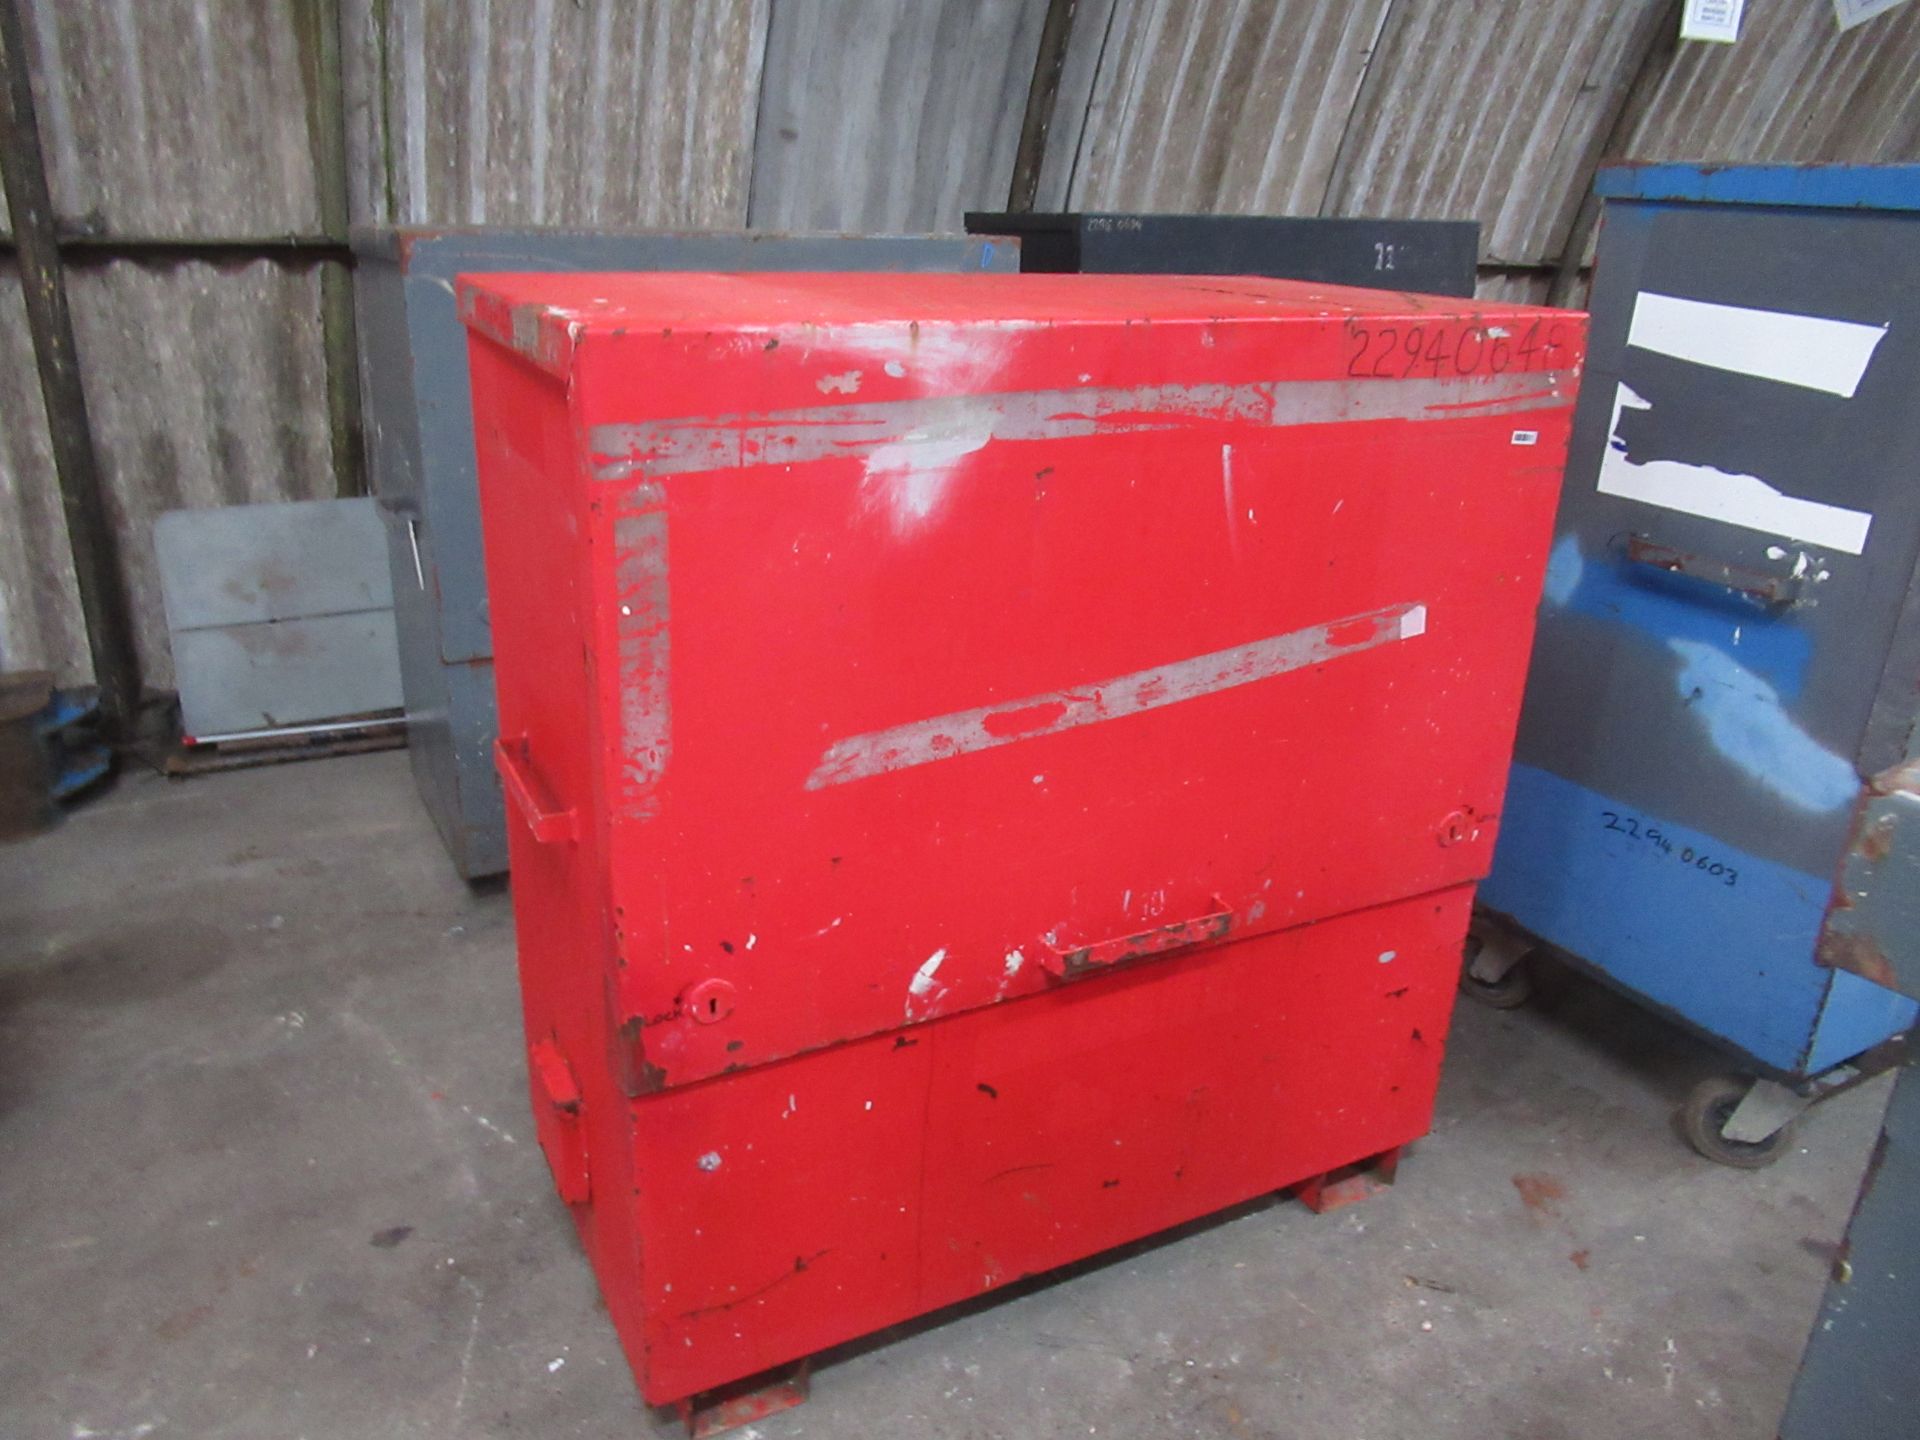 Steel Site Tool Chest 1200 x 620 x 1300hmm (Locked) - Image 2 of 2